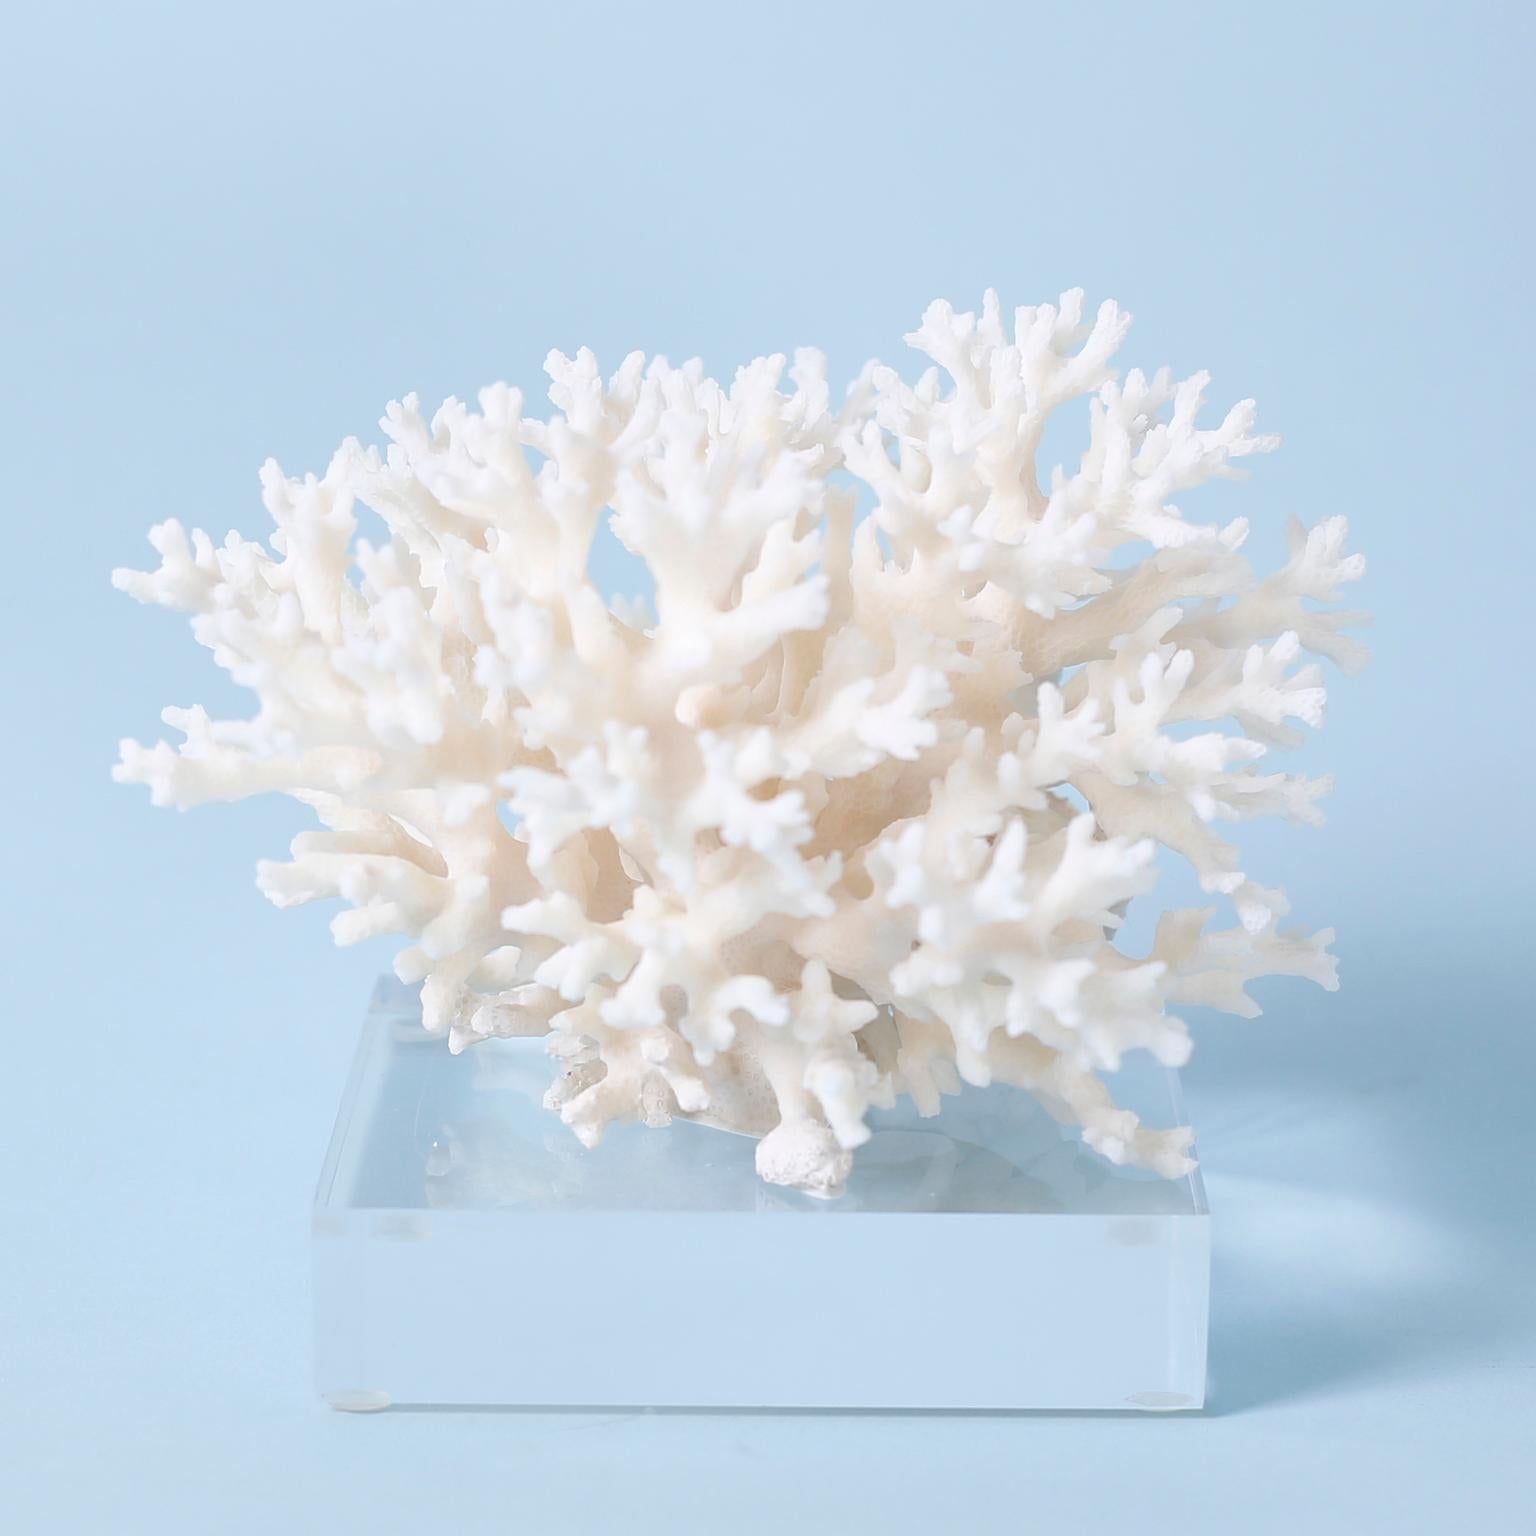 Three lofty lace coral specimens each with its bleached white color and unique sea inspired form and texture, presented on Lucite bases to enhance their sculptural elements. Priced individually.

Please note that coral cannot be exported out of the